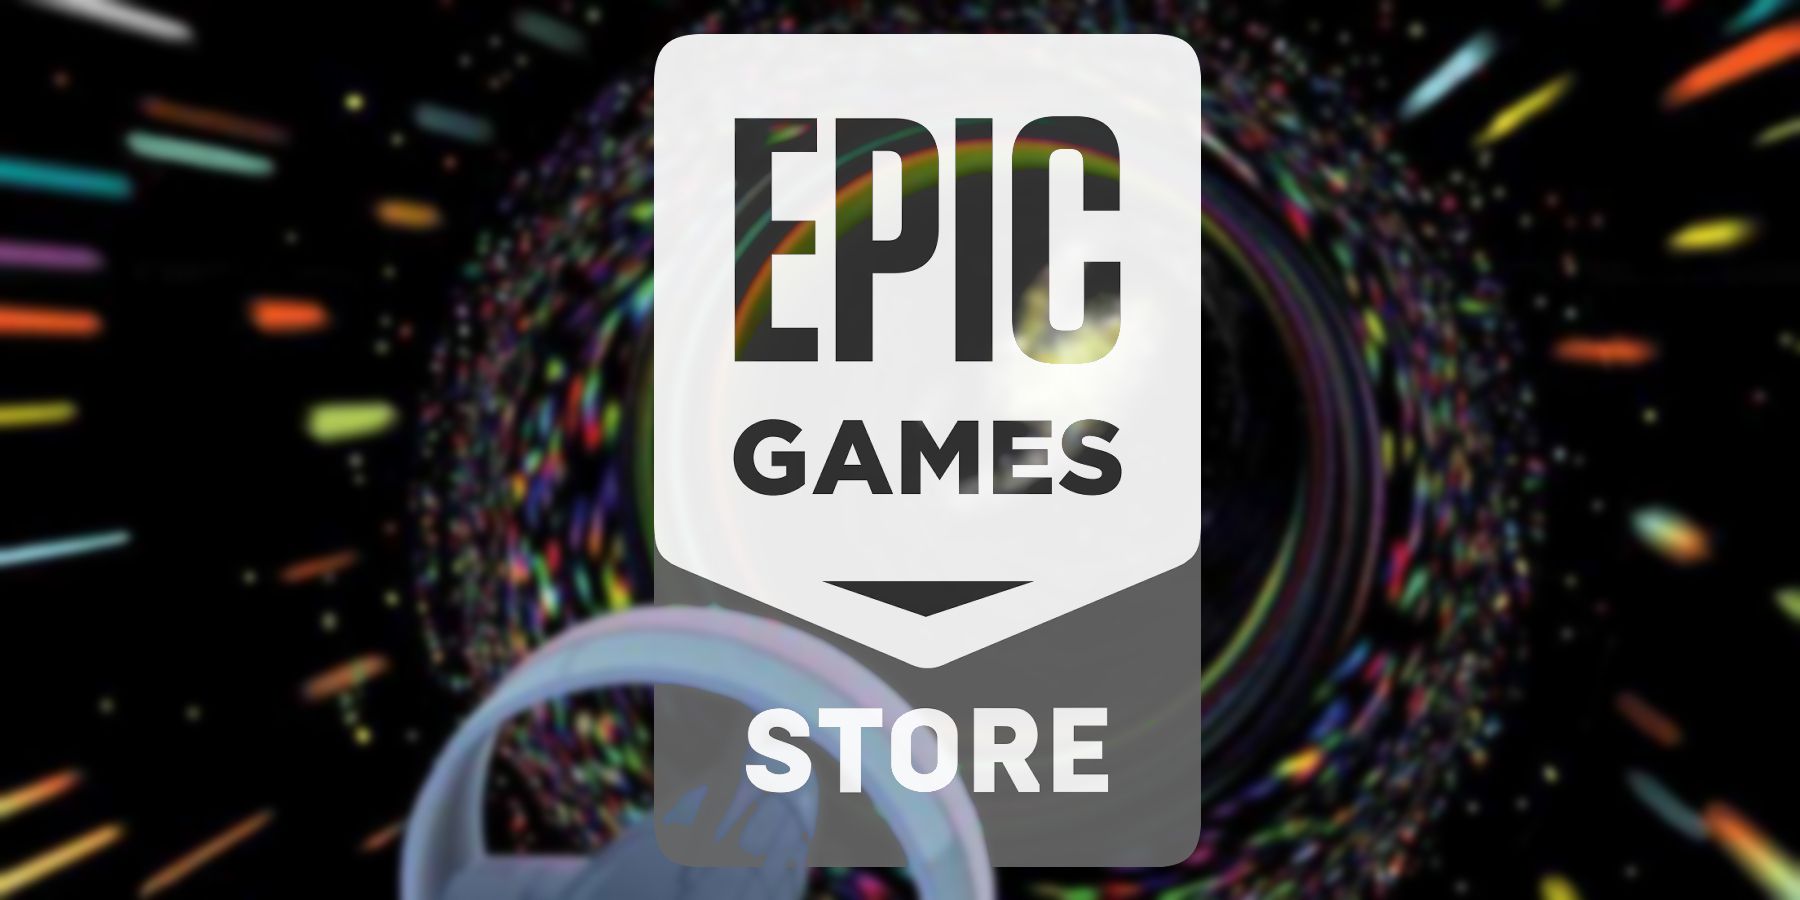 epic-games-store-blast-past-wormhole